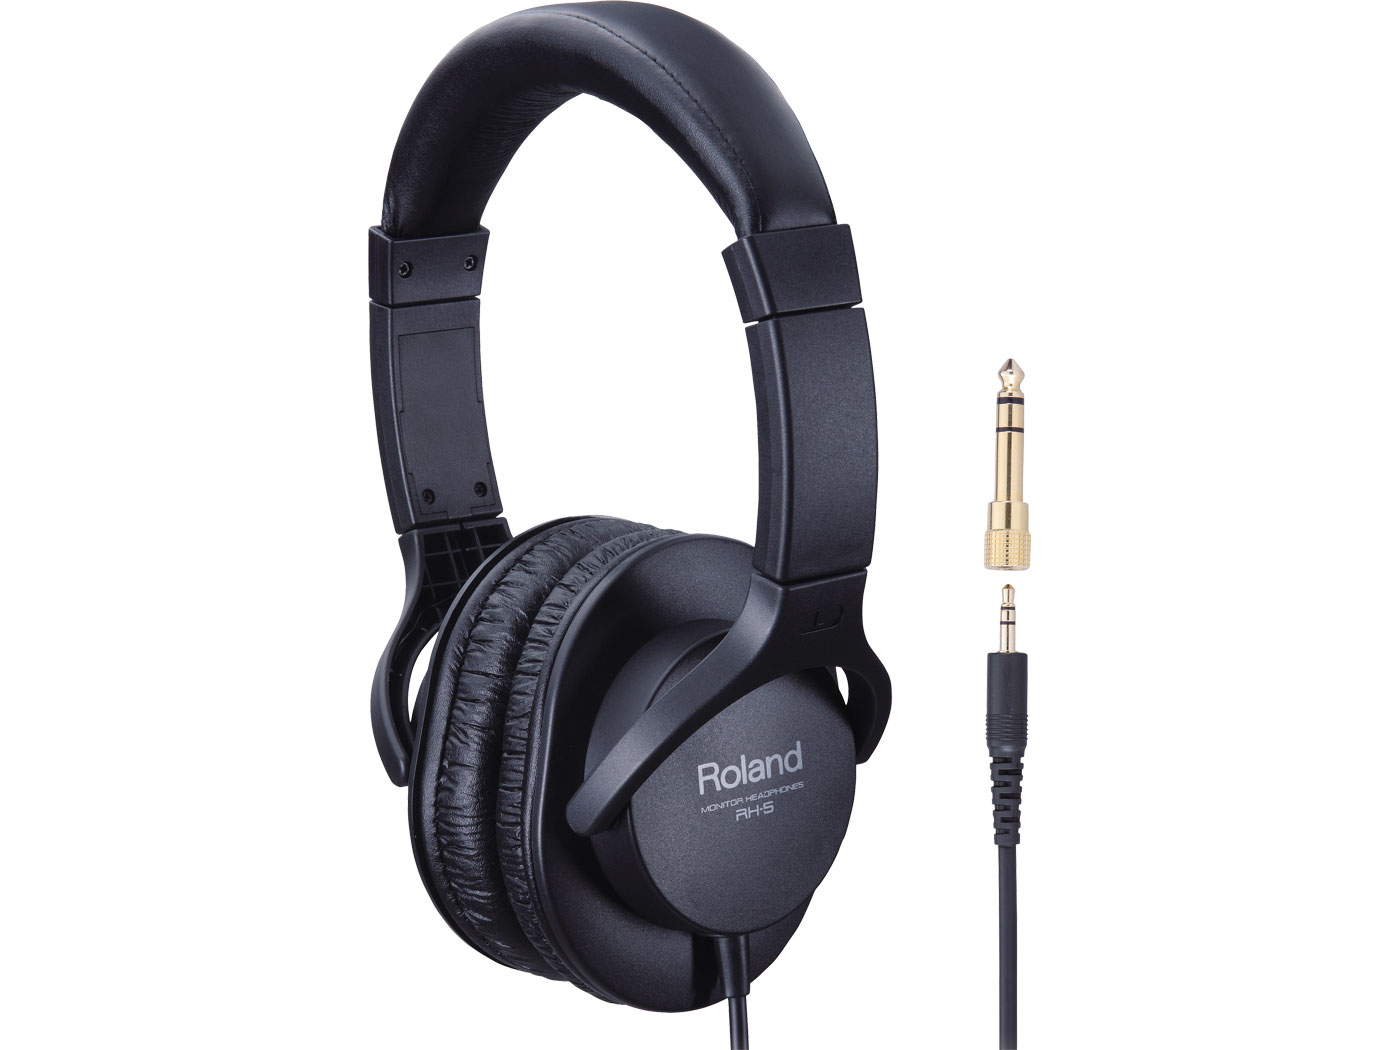 RH-5 Quality Comfort-Fit Stereo Headphones/10-22000Hz/32 ohm by Roland